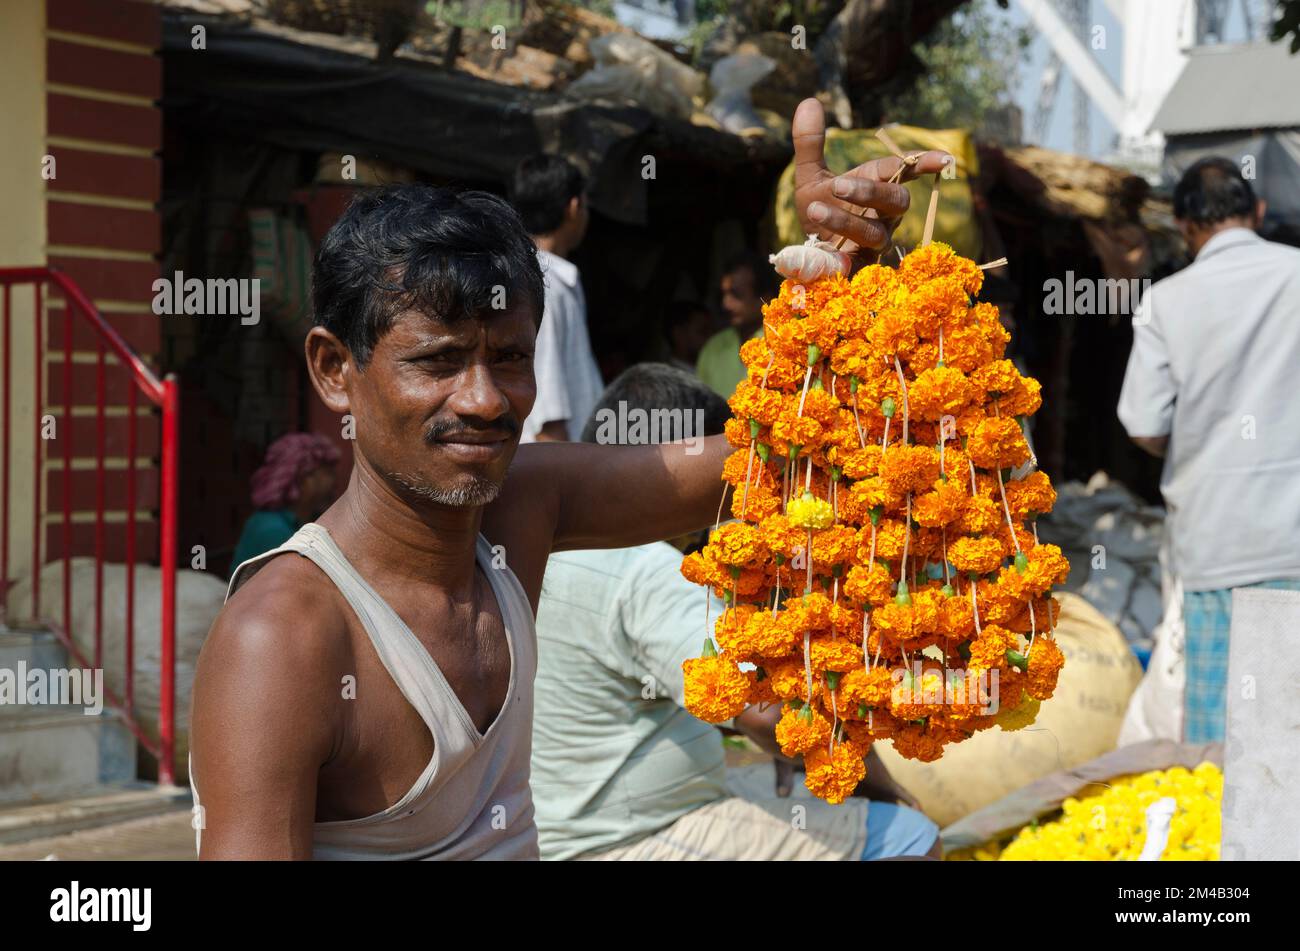 Vendor at the flowermarket of Kolkata.The 125-year Kolkata Flower Market is eastern India’s largest flower market with hundreds of stalls and people s Stock Photo